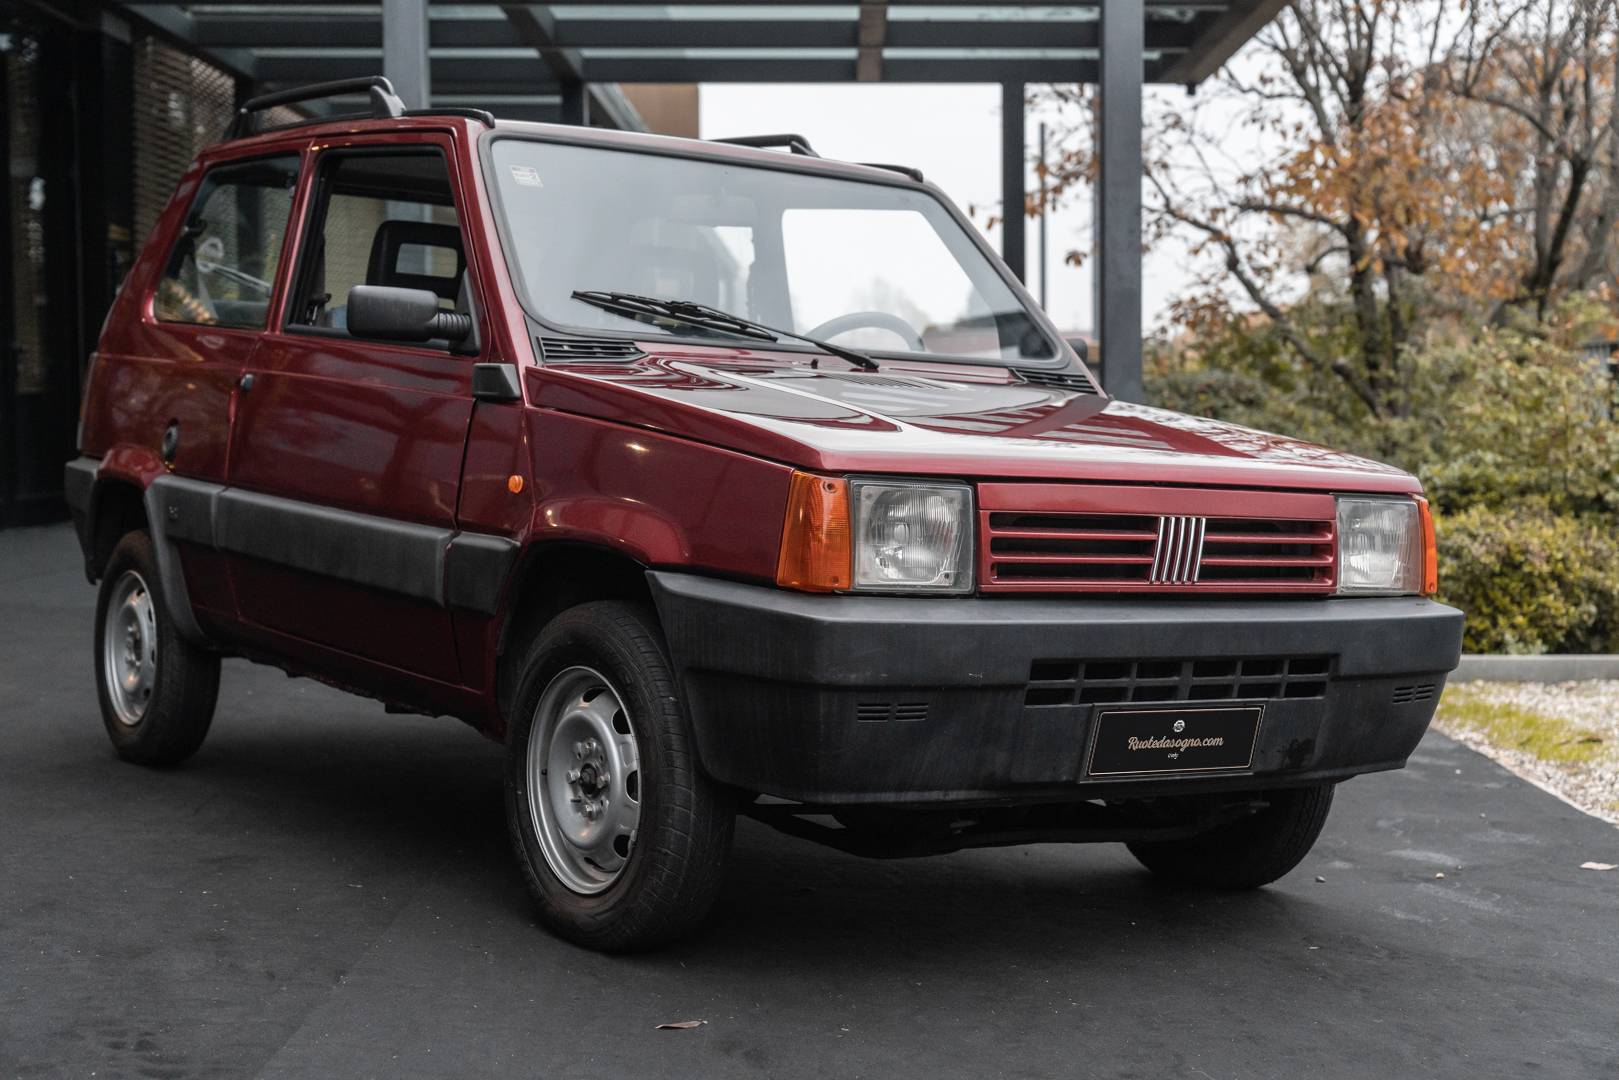 FIAT Panda Classic Cars for Sale - Classic Trader